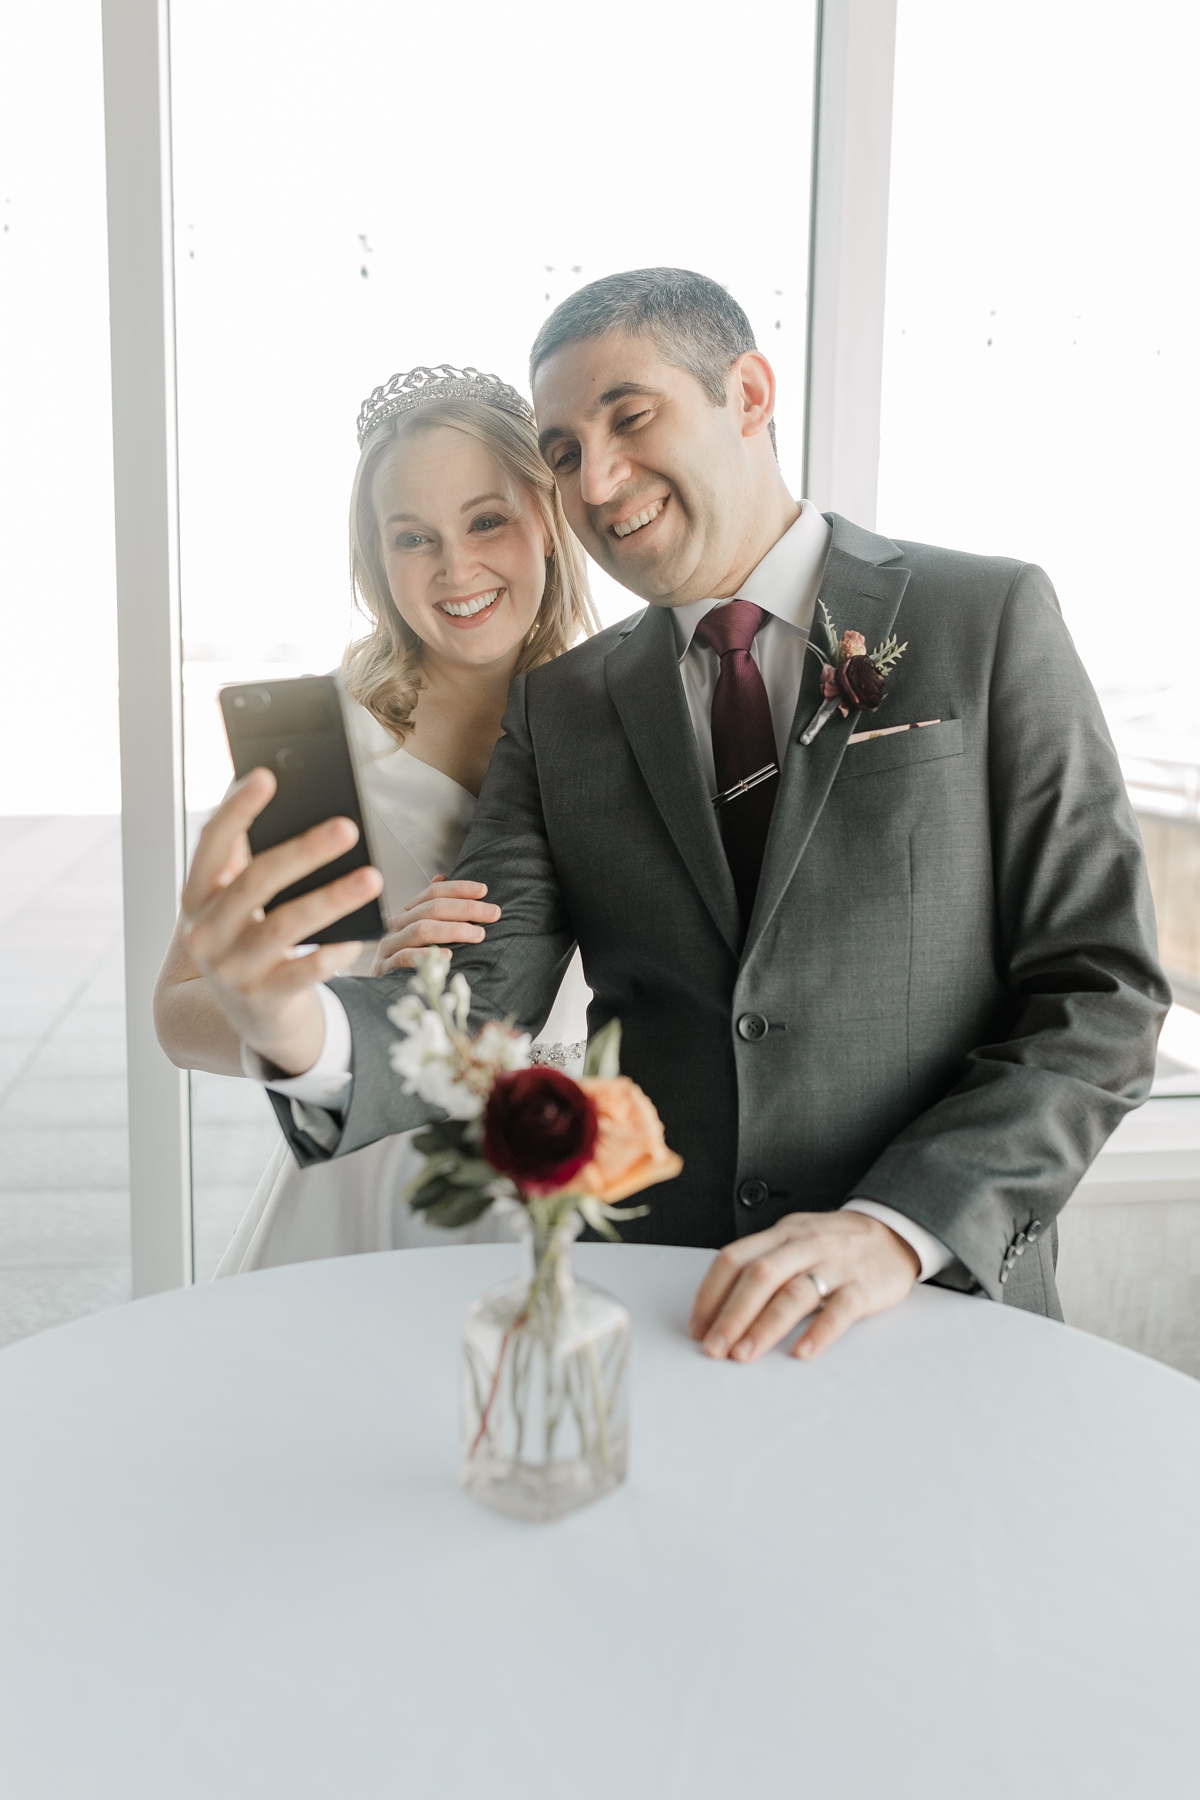 bride and groom facetiming family at wedding